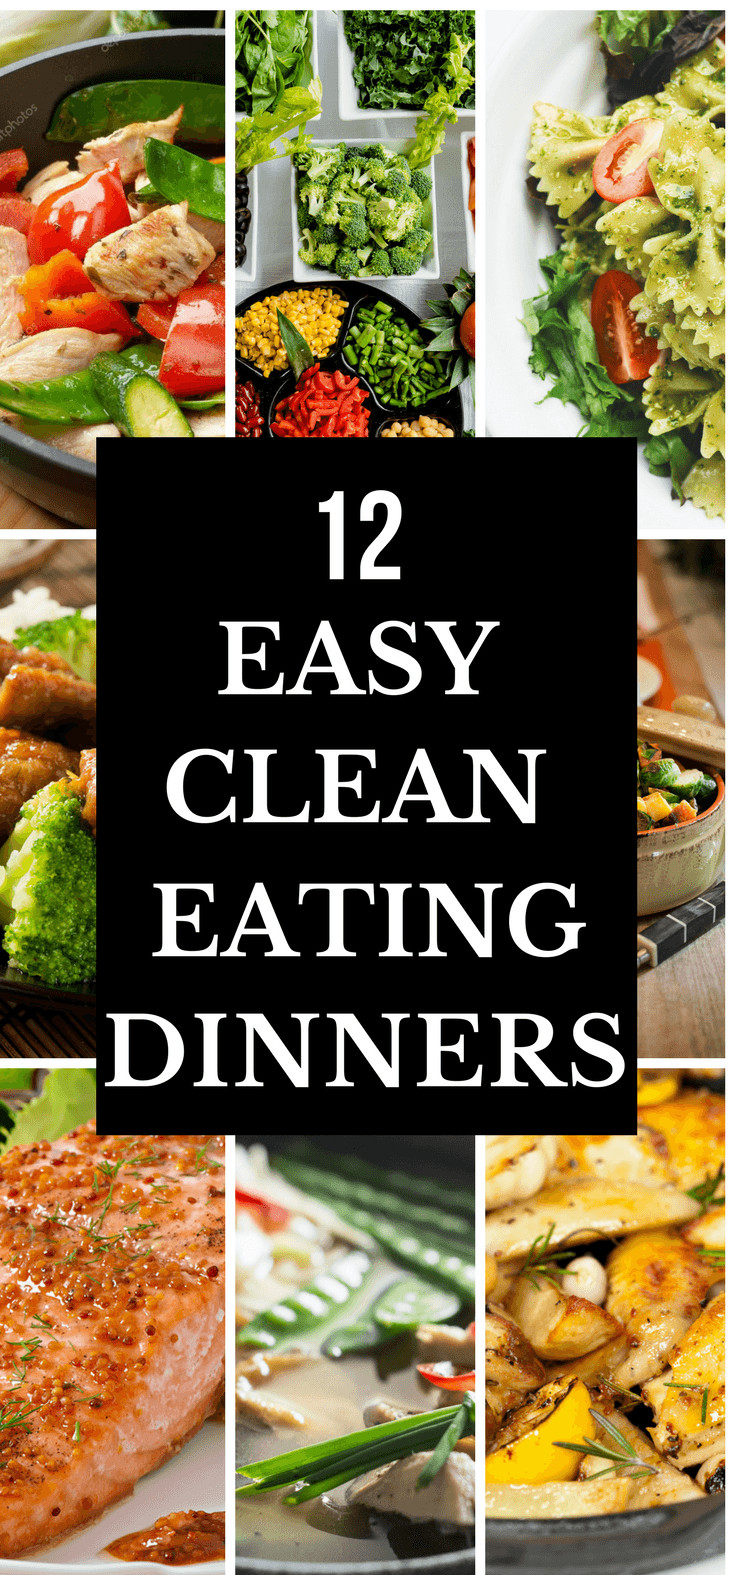 Clean Eating Recipes For Dinner
 12 Easy Clean Eating Dinner Recipes Ready To Eat In 30 Minutes